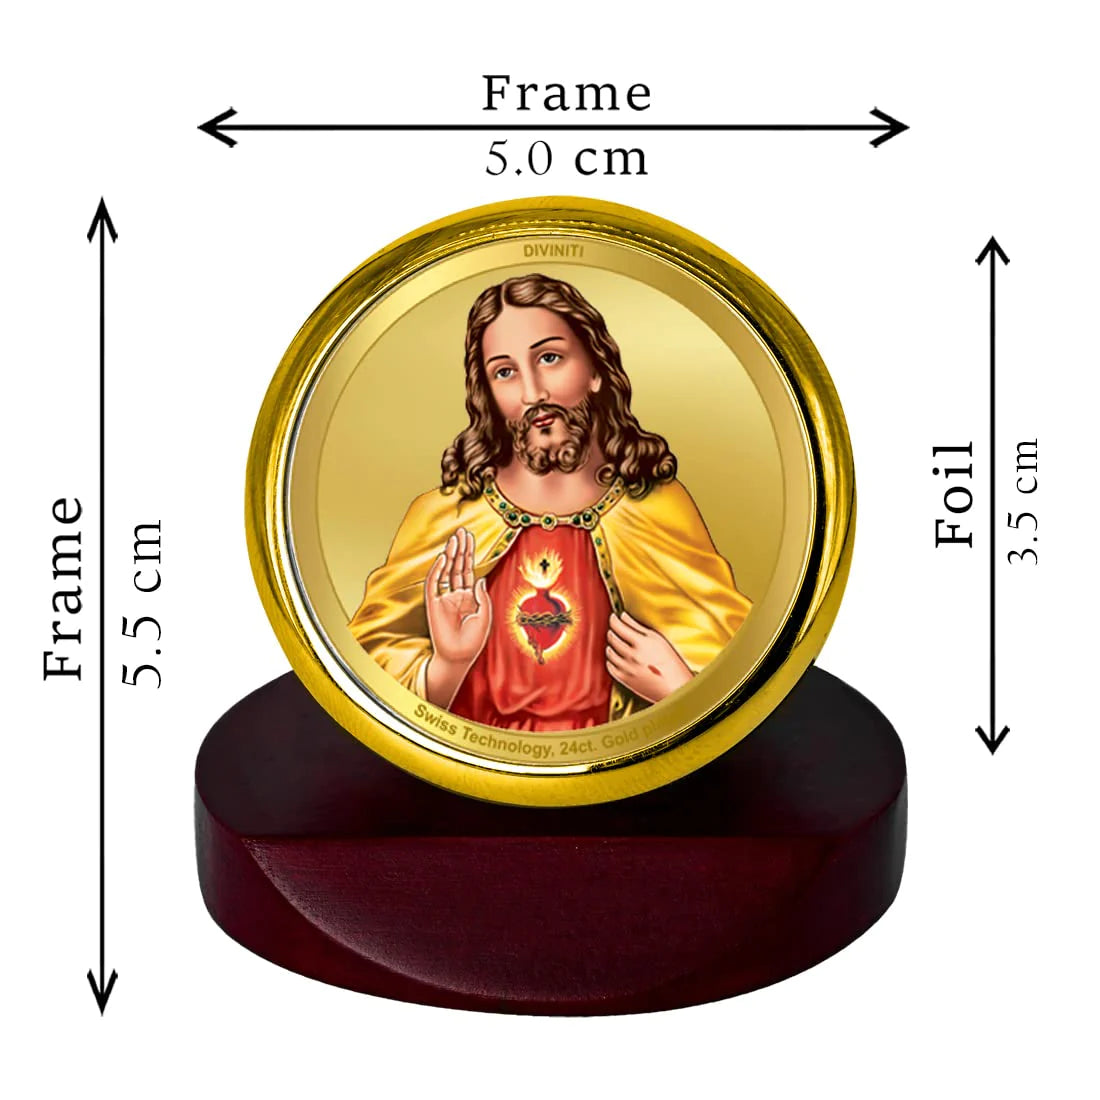 Lord Jesus Christ God Idol Photo Frame for Car Dashboard, Table Decor, office